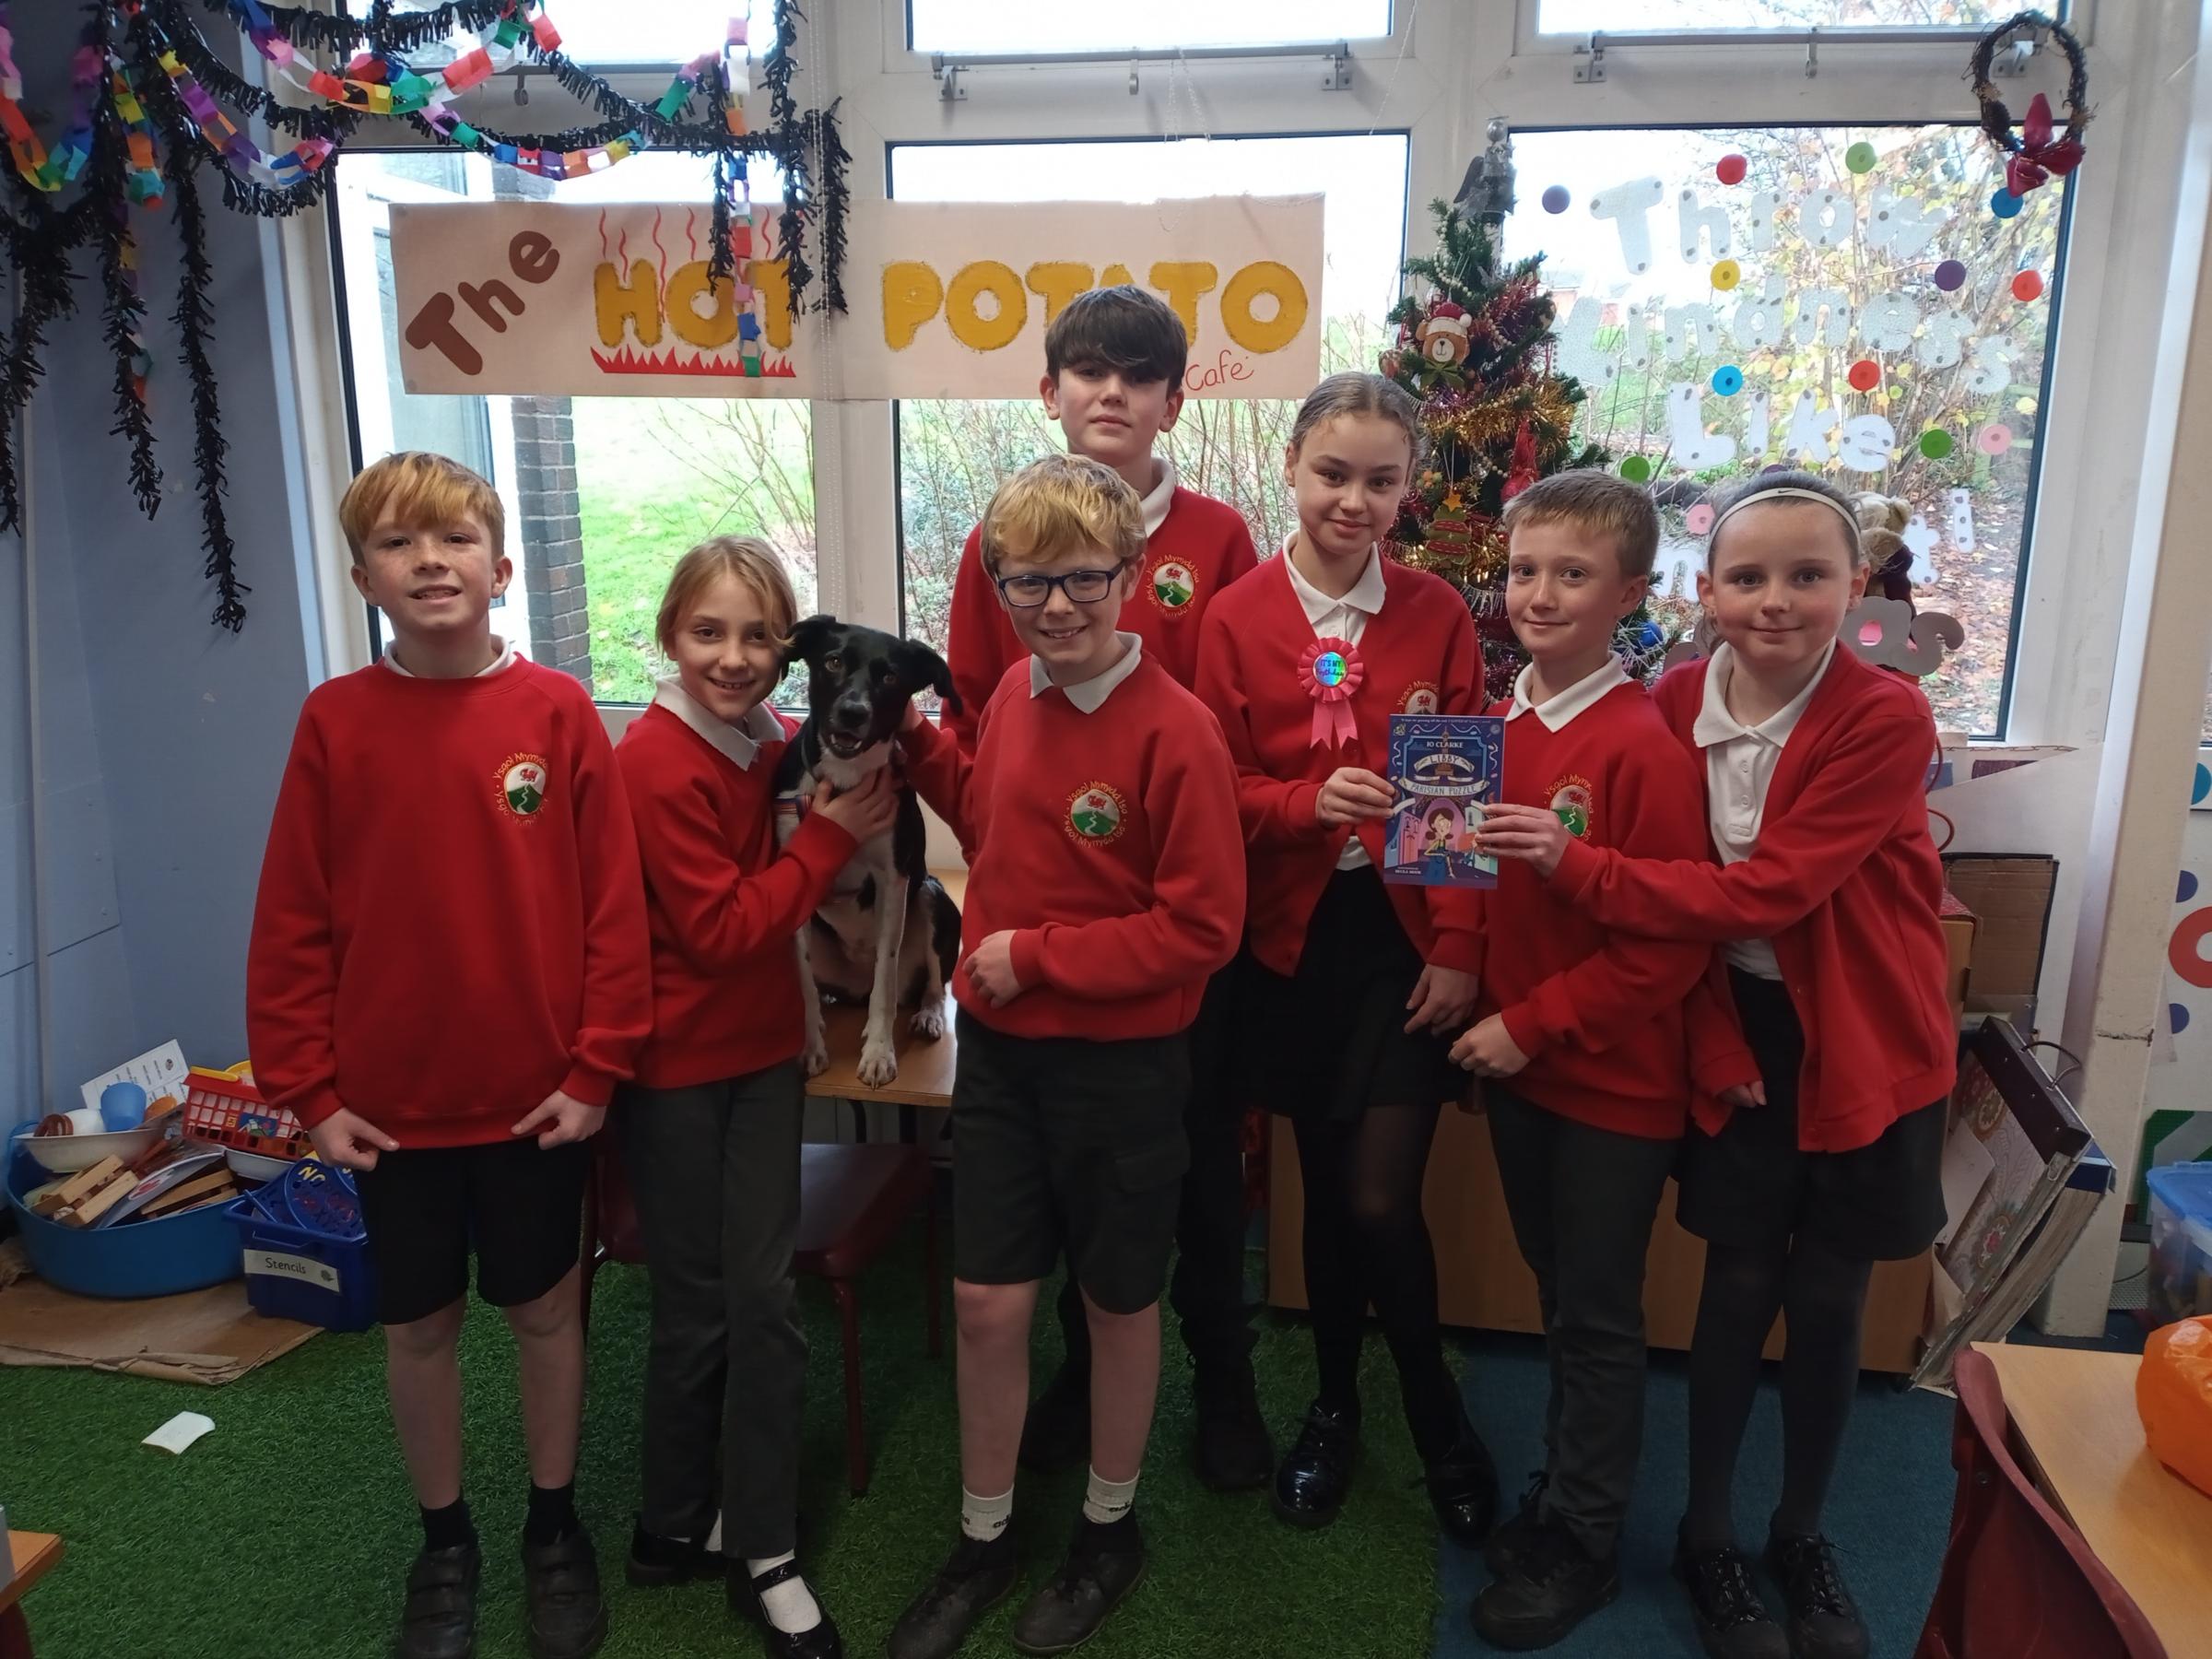 The group of Ysgol Mynydd Isa pupils with visiting therapy dog Penny.